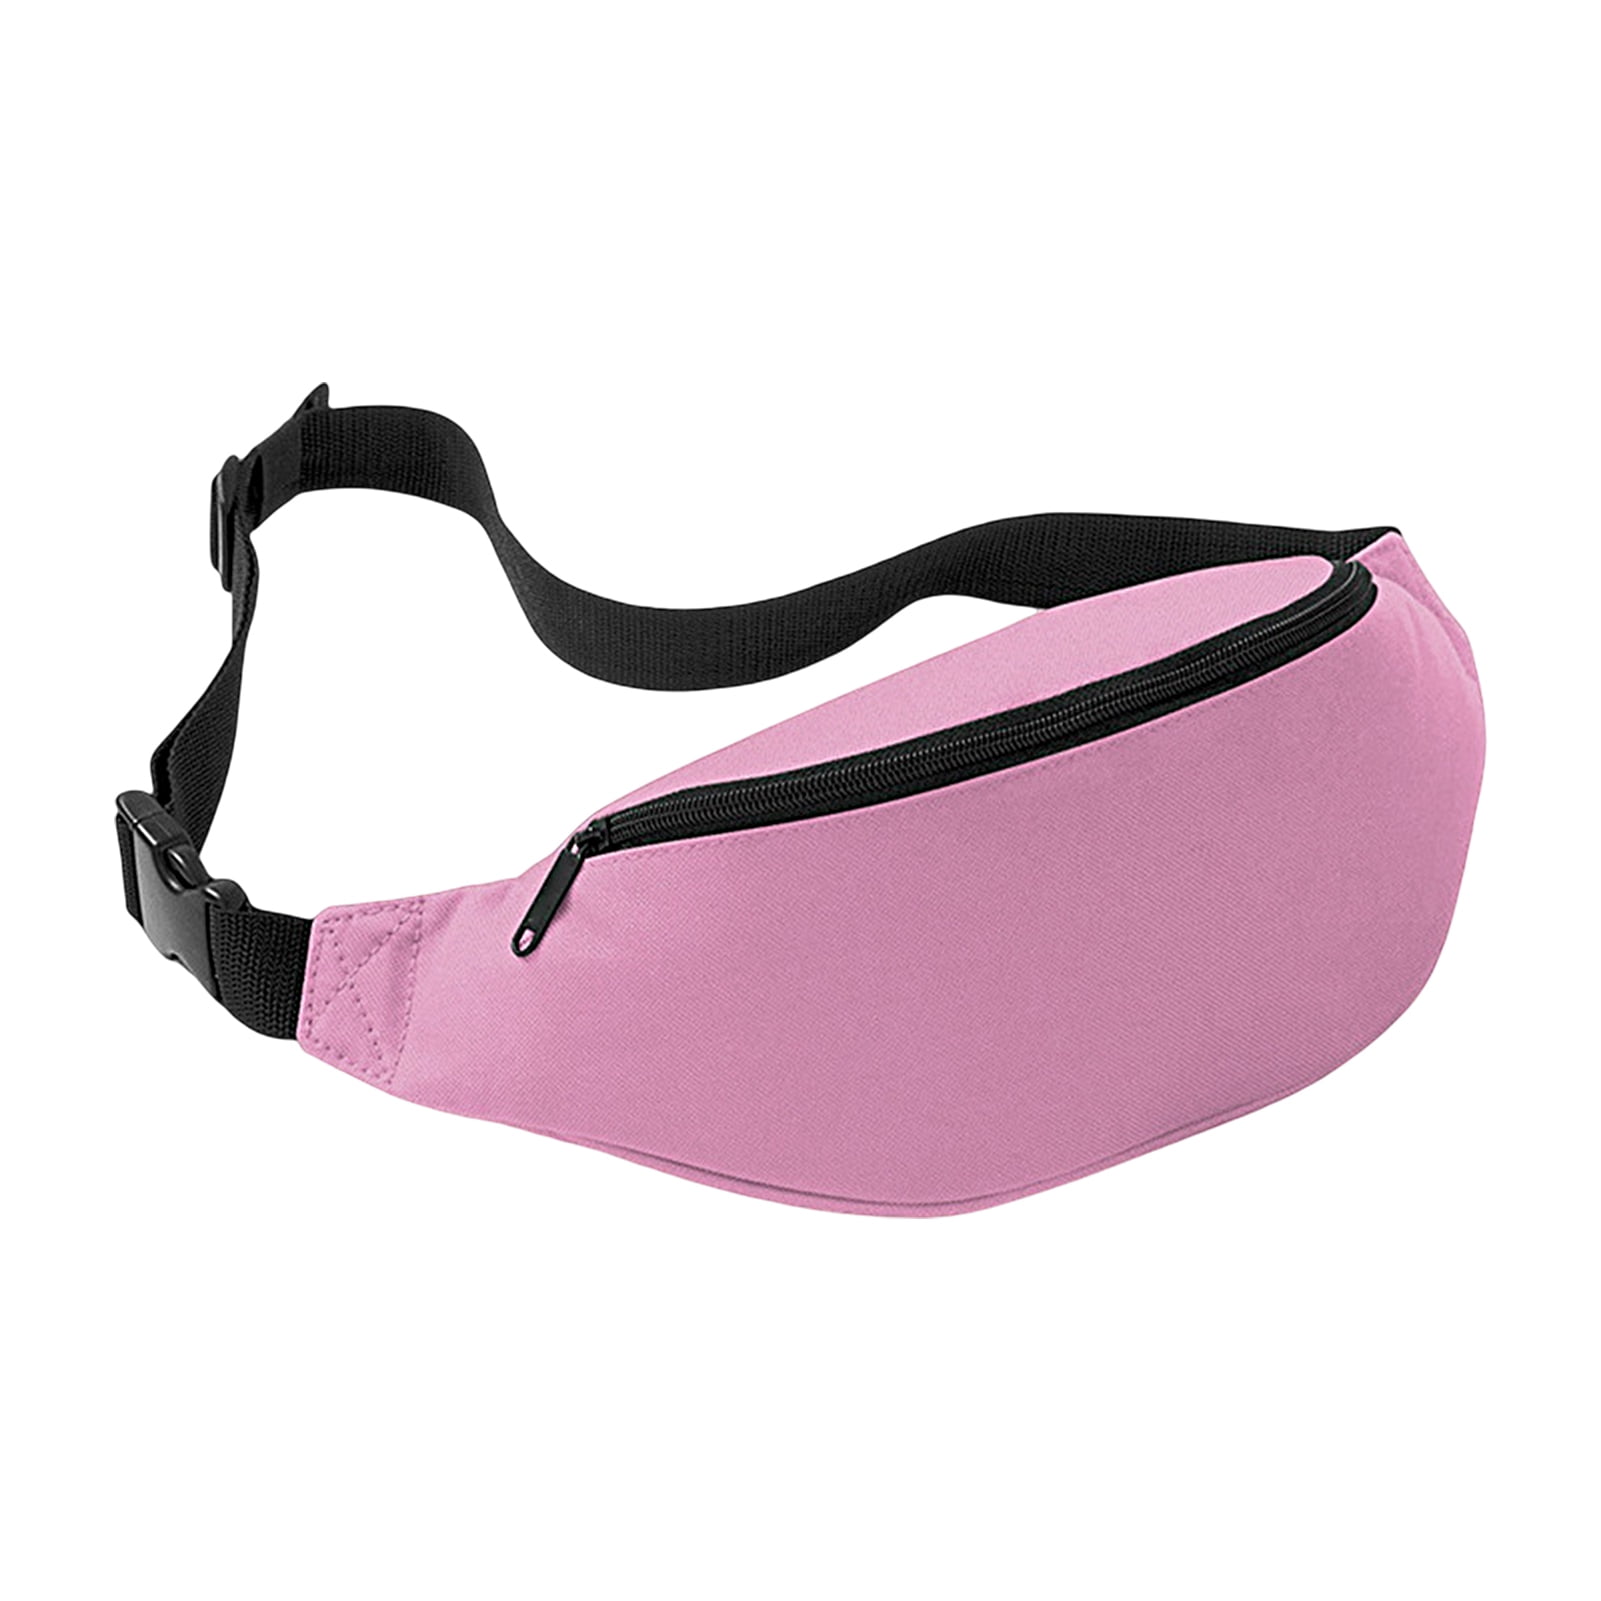 Burgundy Plus Size Fanny Pack with Adjustable Strap 34-60 Inches